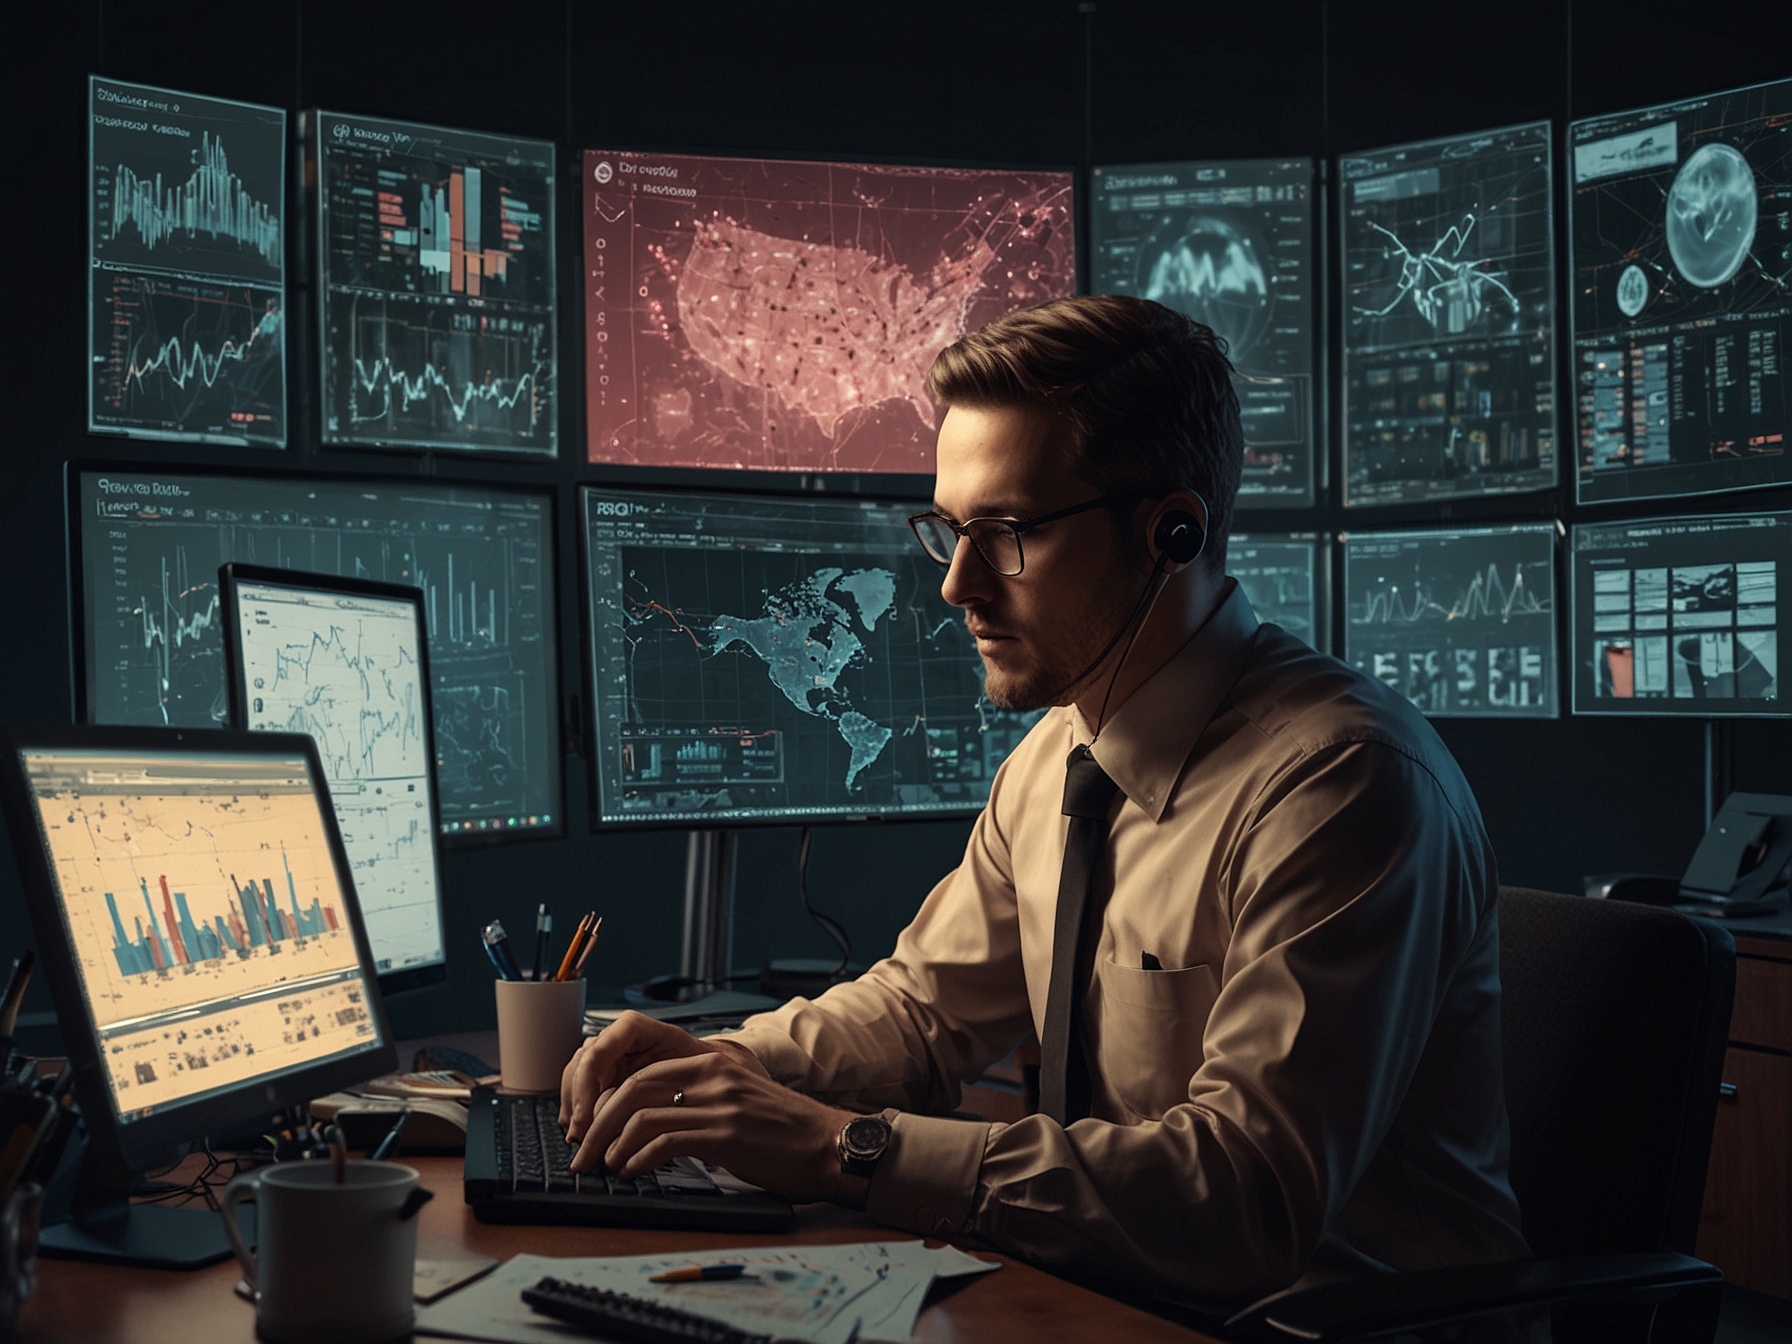 A security analyst working at a desk, surrounded by multiple screens with alerts, symbolizing the overwhelm and complexity of managing cybersecurity without AI assistance.